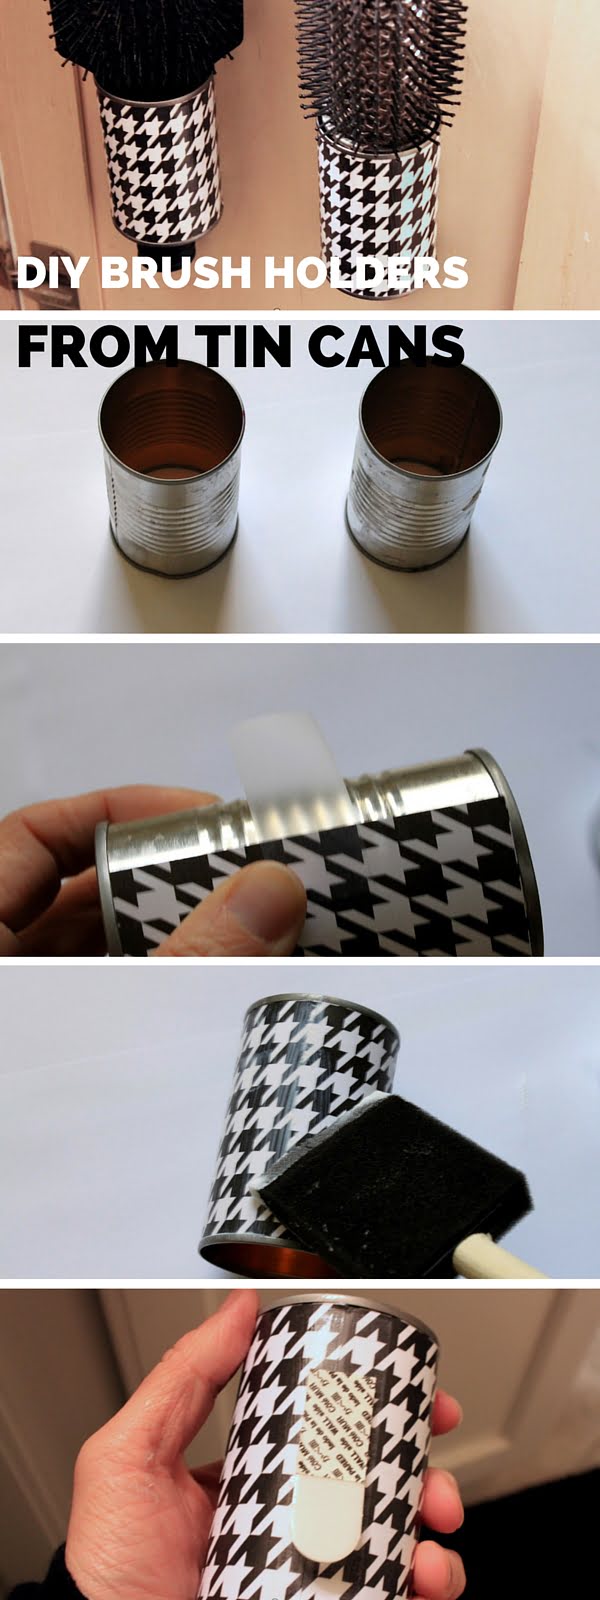 Check out the tutorial:  Brush Holders 